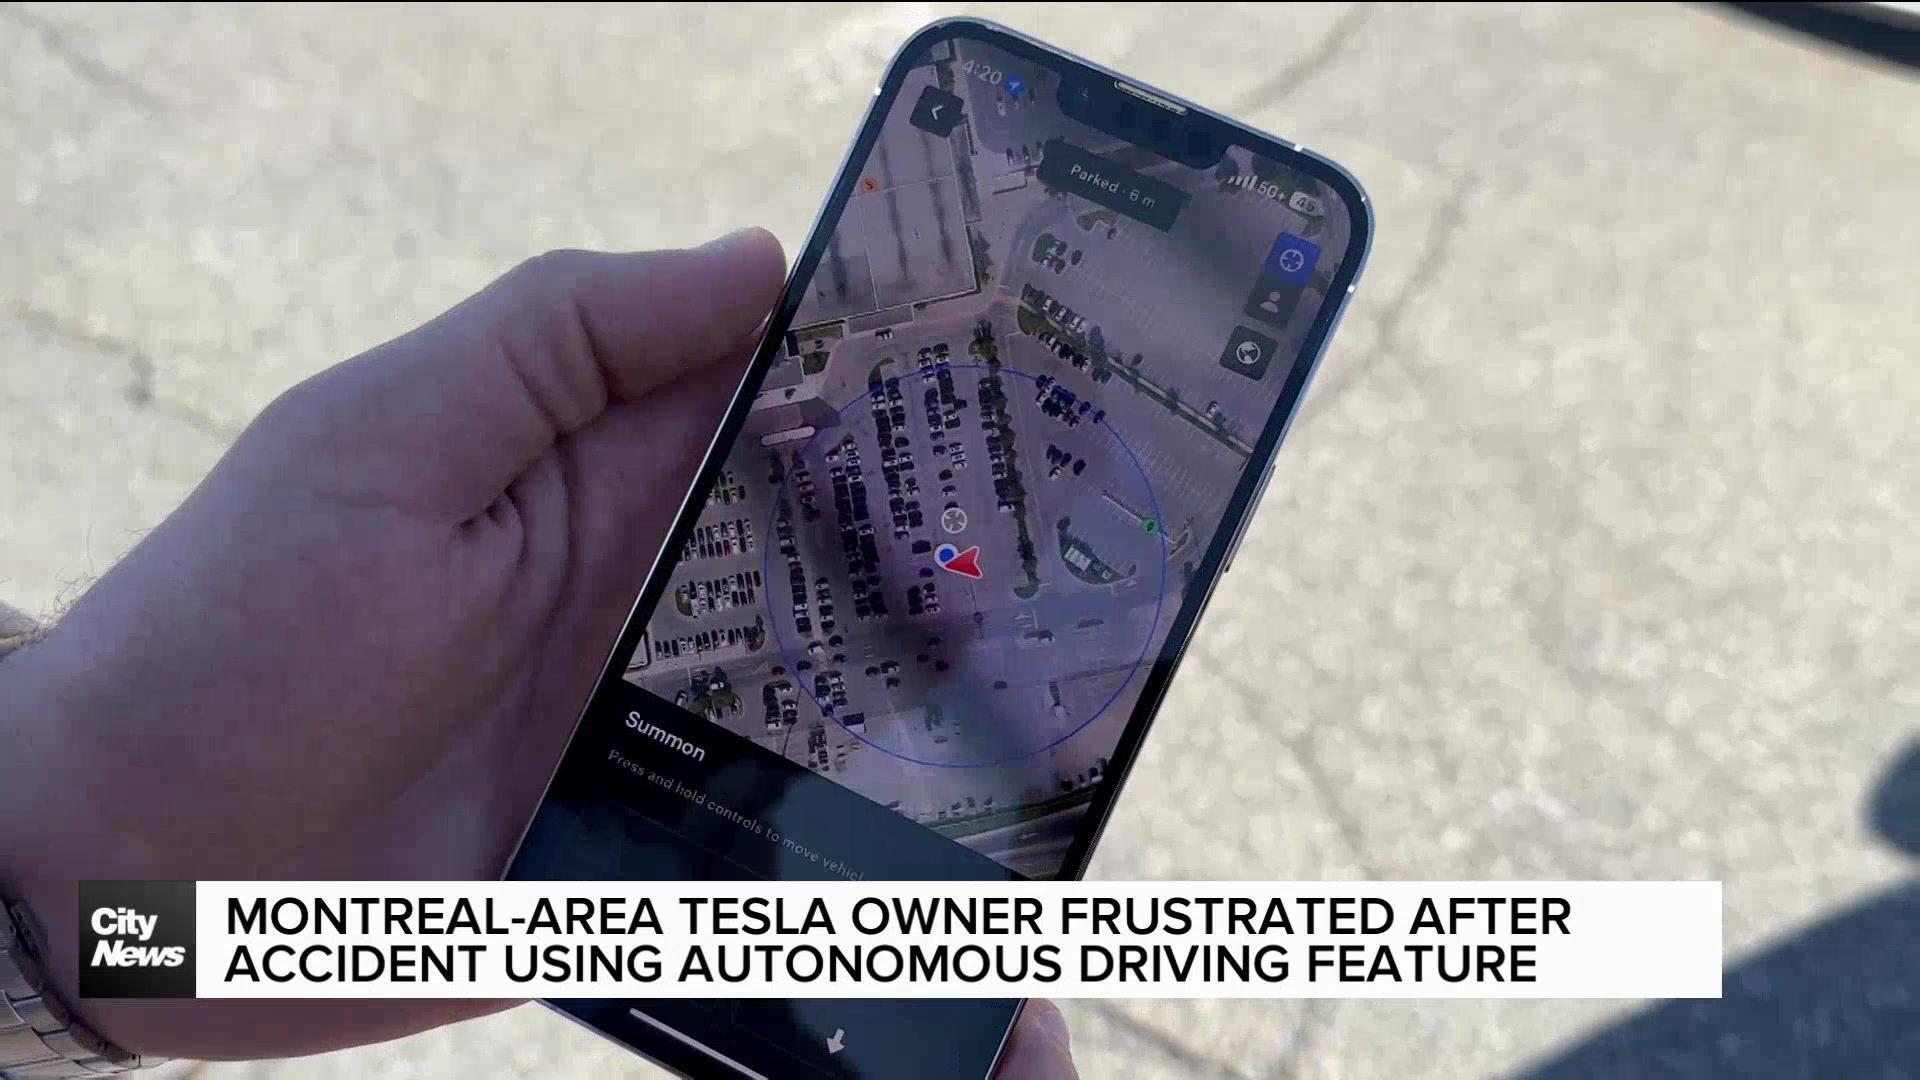 Montreal-area Tesla owner frustrated after accident using driving app